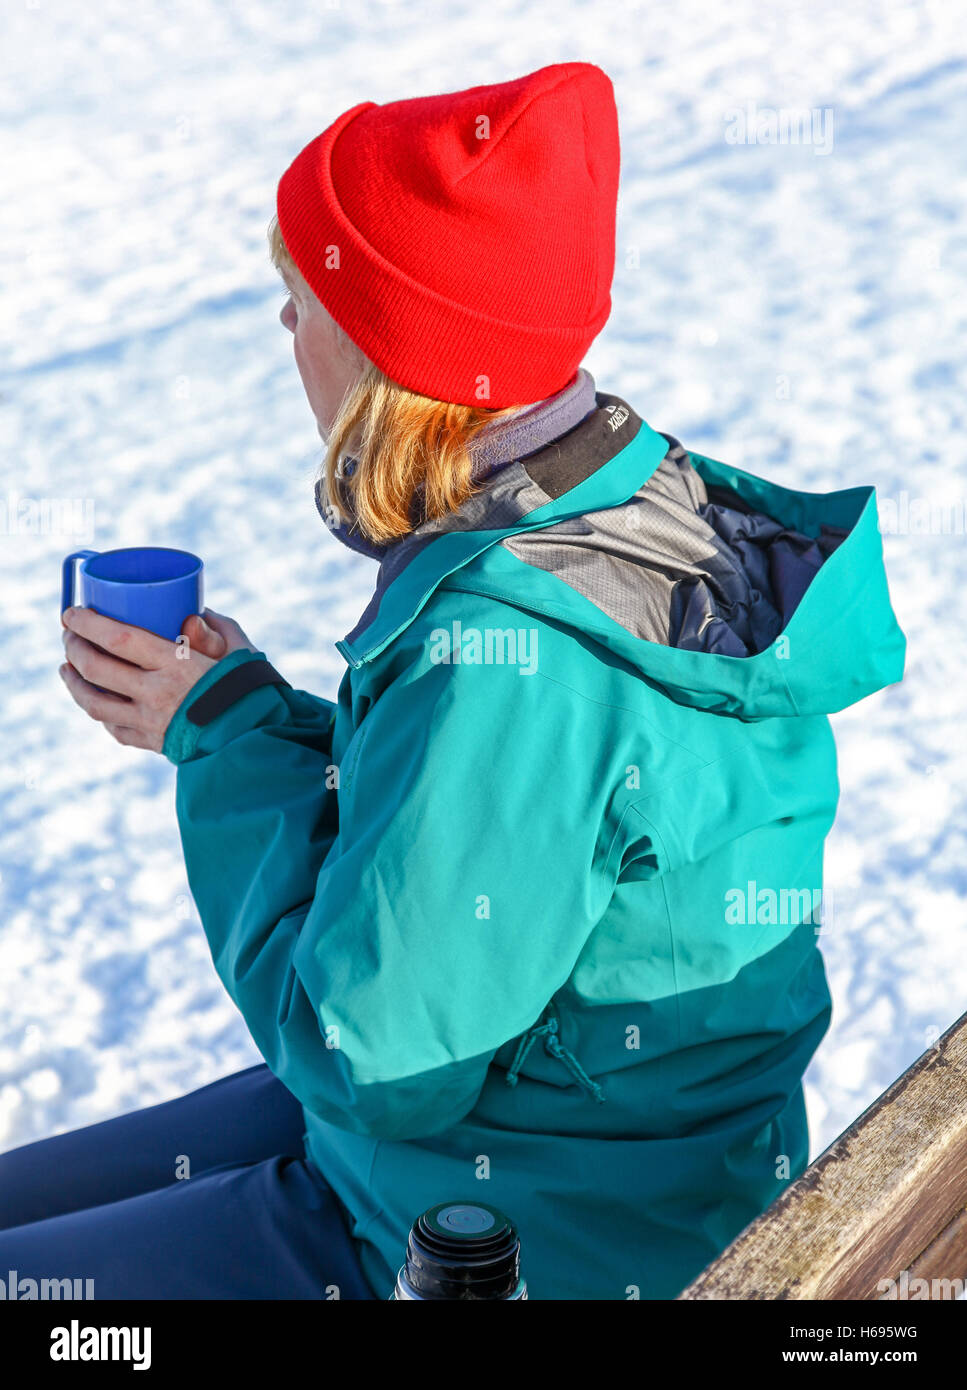 https://c8.alamy.com/comp/H695WG/a-woman-sitting-outside-in-the-snow-drinking-a-hot-drink-and-warming-H695WG.jpg